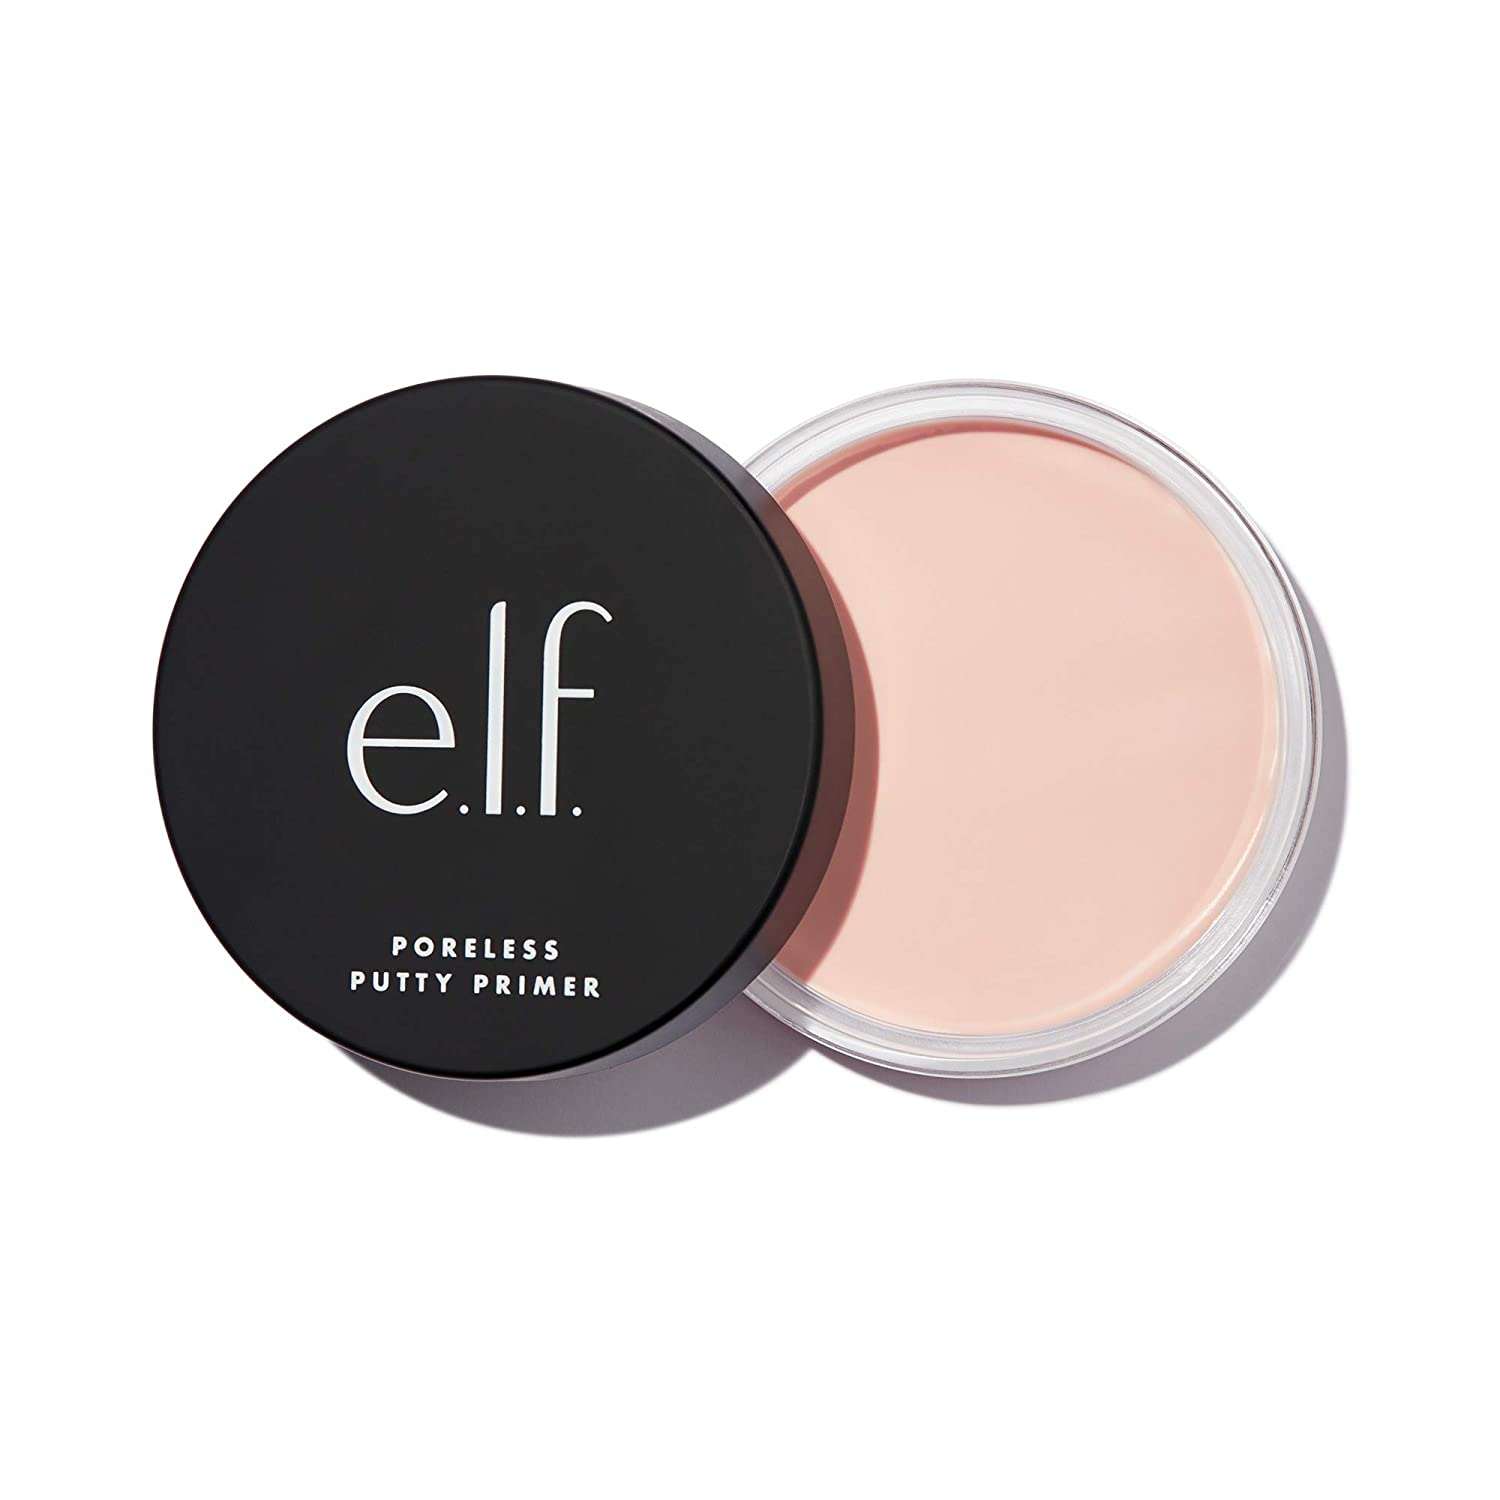 e.l.f. Poreless Putty Primer is a Silky, Skin-Perfecting, Lightweight and Long Lasting primer. It is Smooths that Hydrates, Minimizes Pores and gives Flawless Base All-Day Wear for Flawless Finish as it is Ideal for All Skin Types.